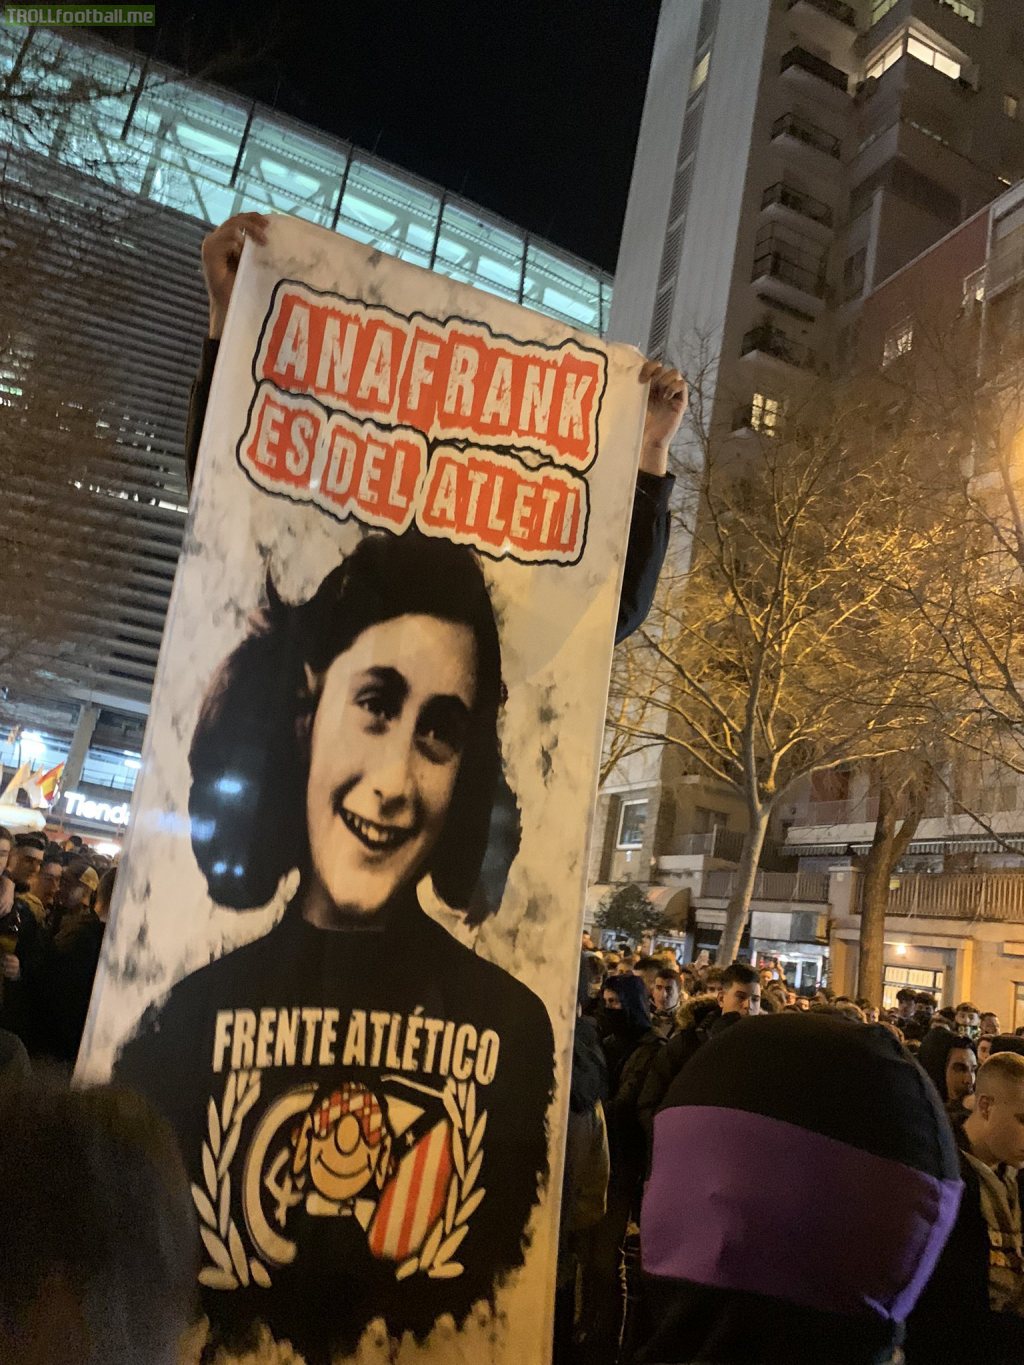 Real Madrid fans with this poster before the game against Atlético in Bernabéu which says "Anne Frank is from Atleti"